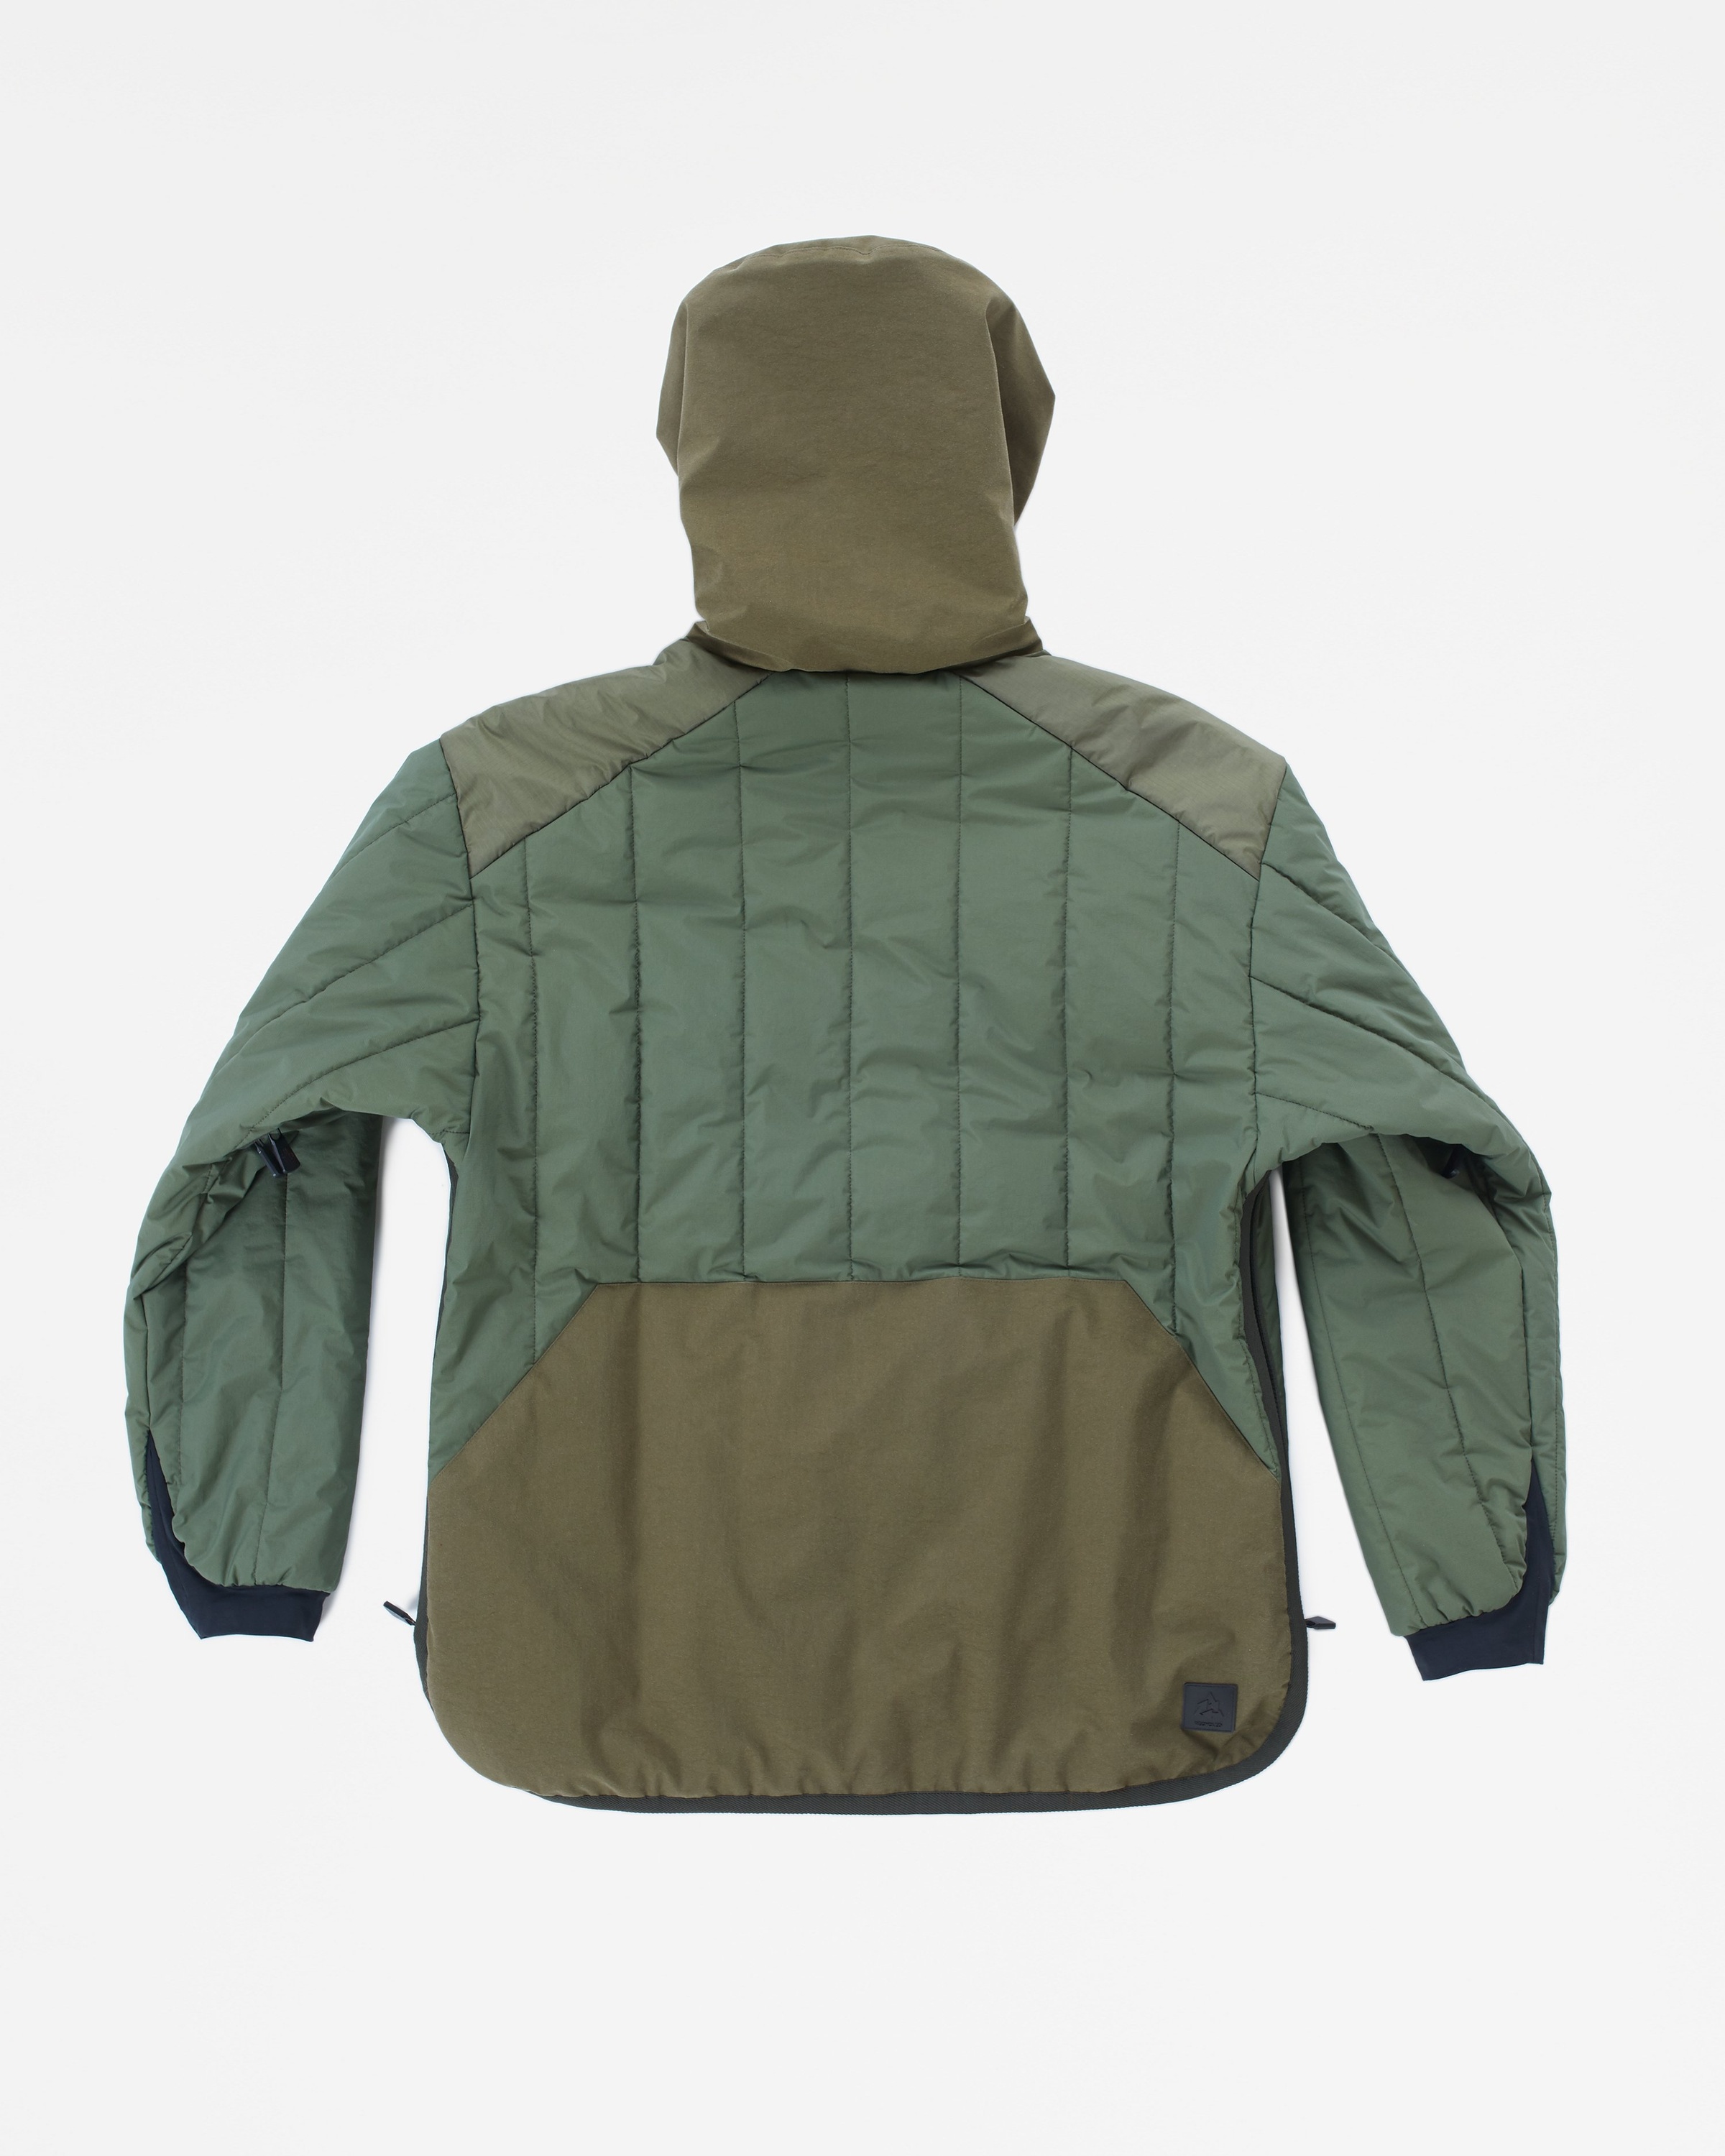 Moncler Genius – Recycled Indren Jacket - Outerwear - Green - Image 2